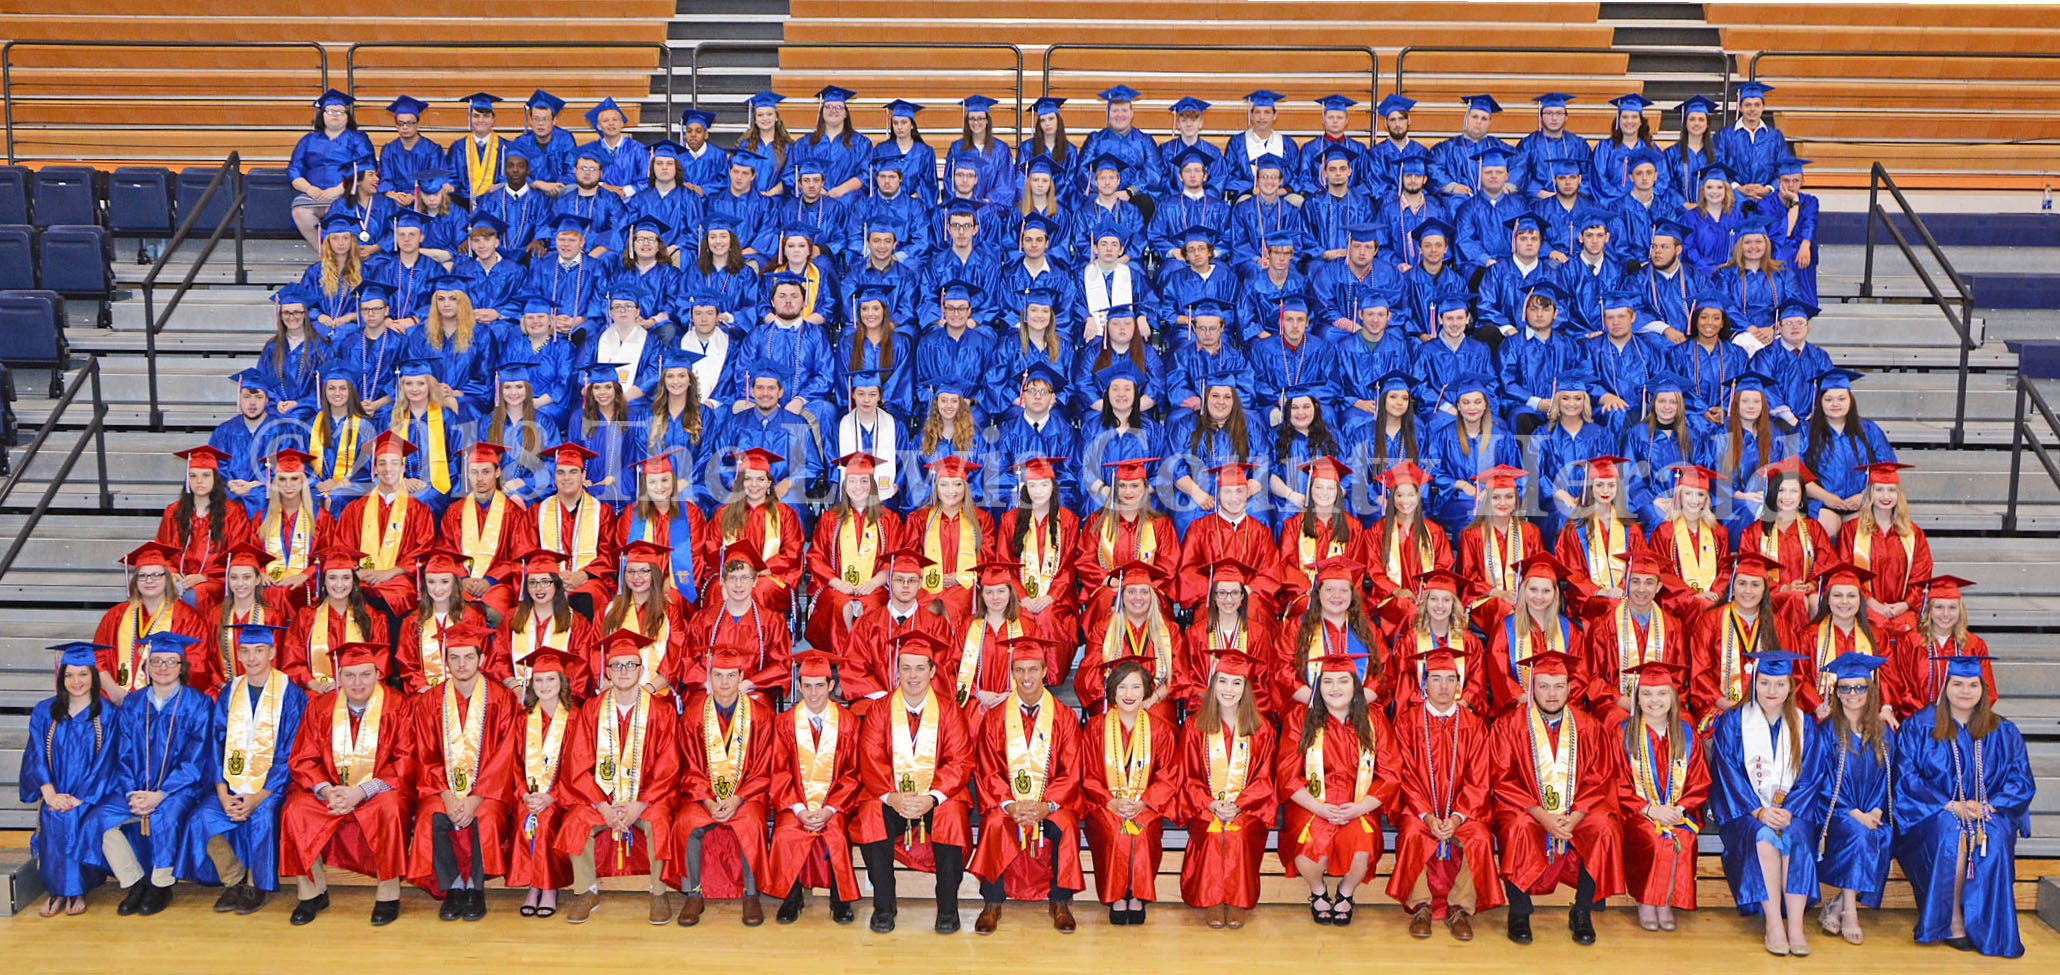 Lewis County High School Class of 2018